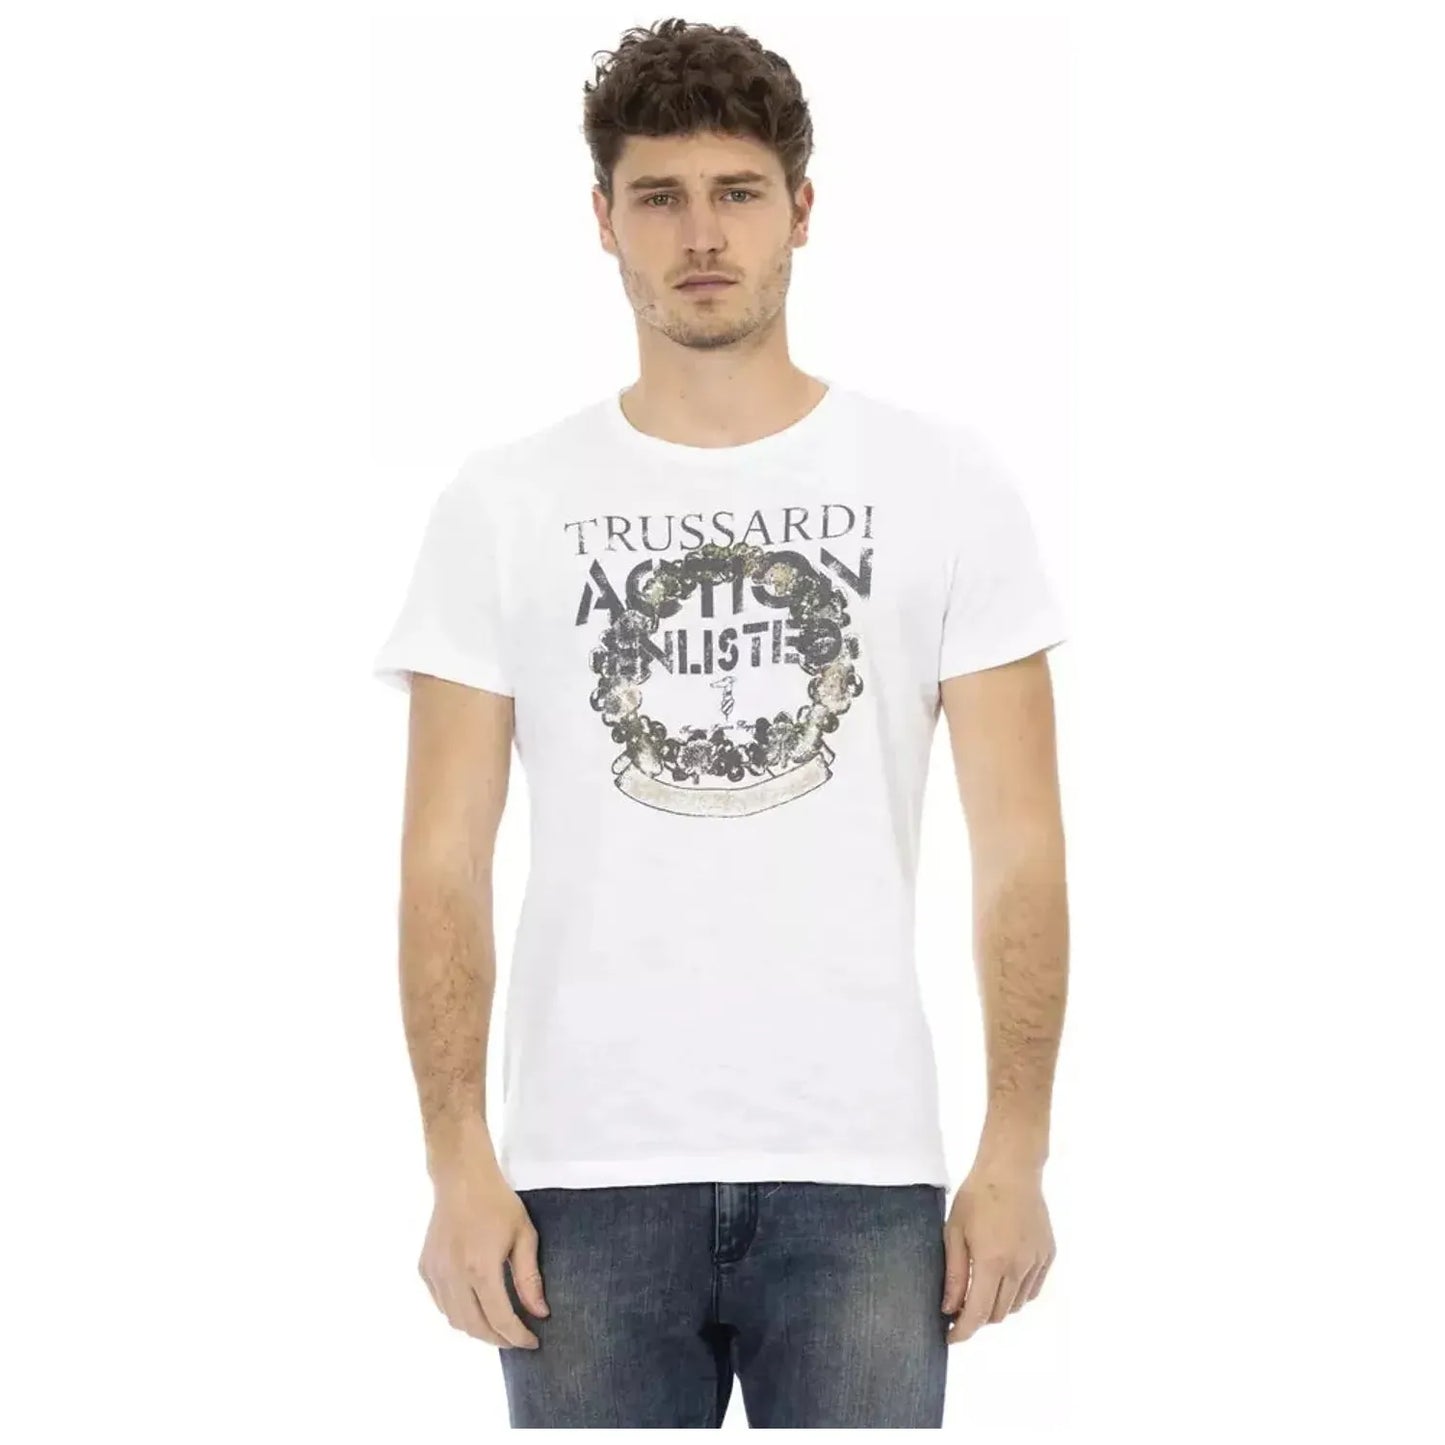 Trussardi Action Chic White Tee with Front Print white-cotton-t-shirt-99